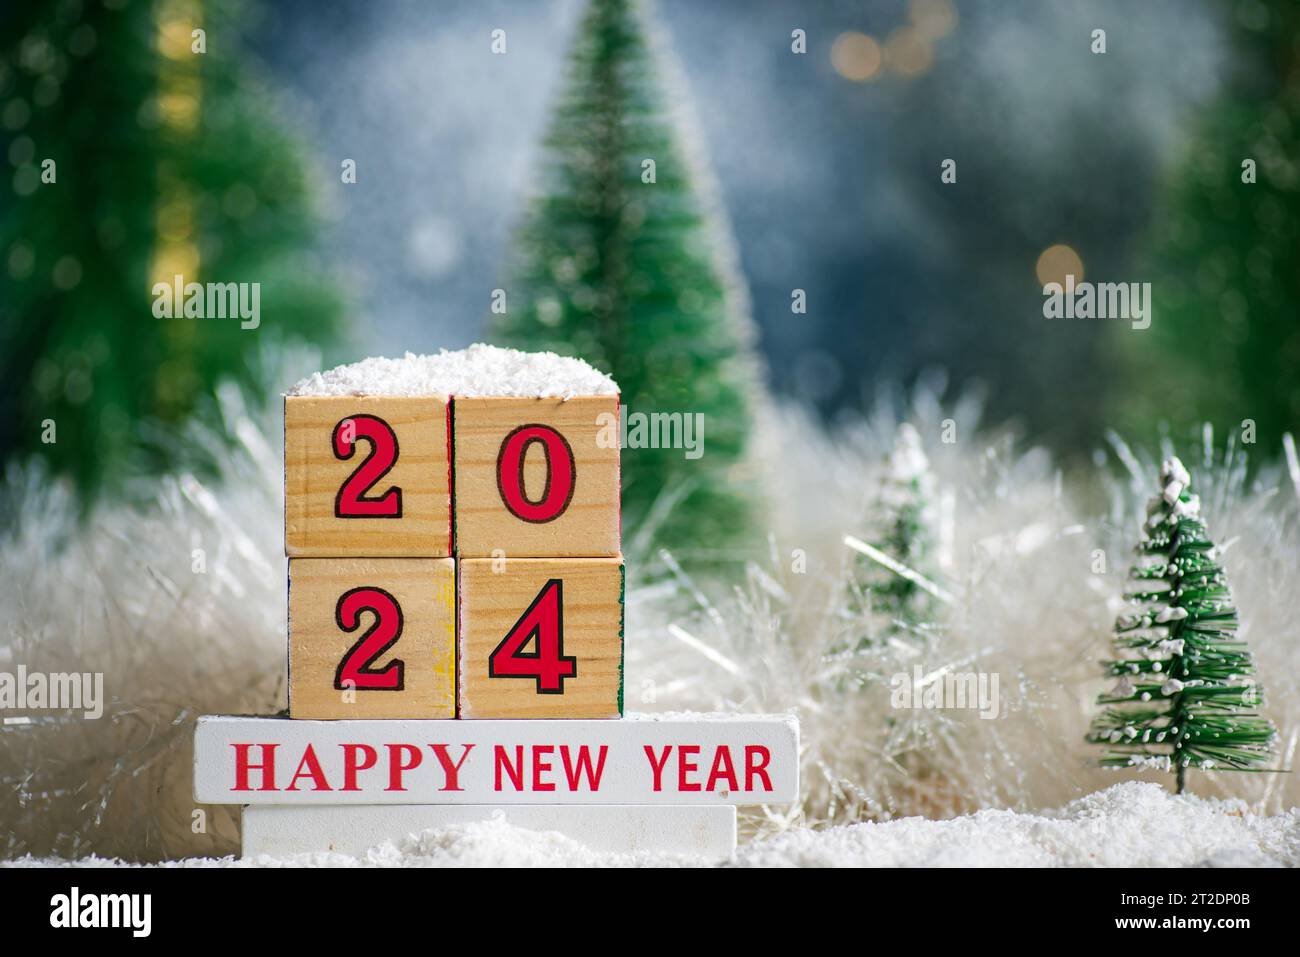 Happy New Year 2024 with Christmas tree winter holiday festive background and ornaments Stock Photo